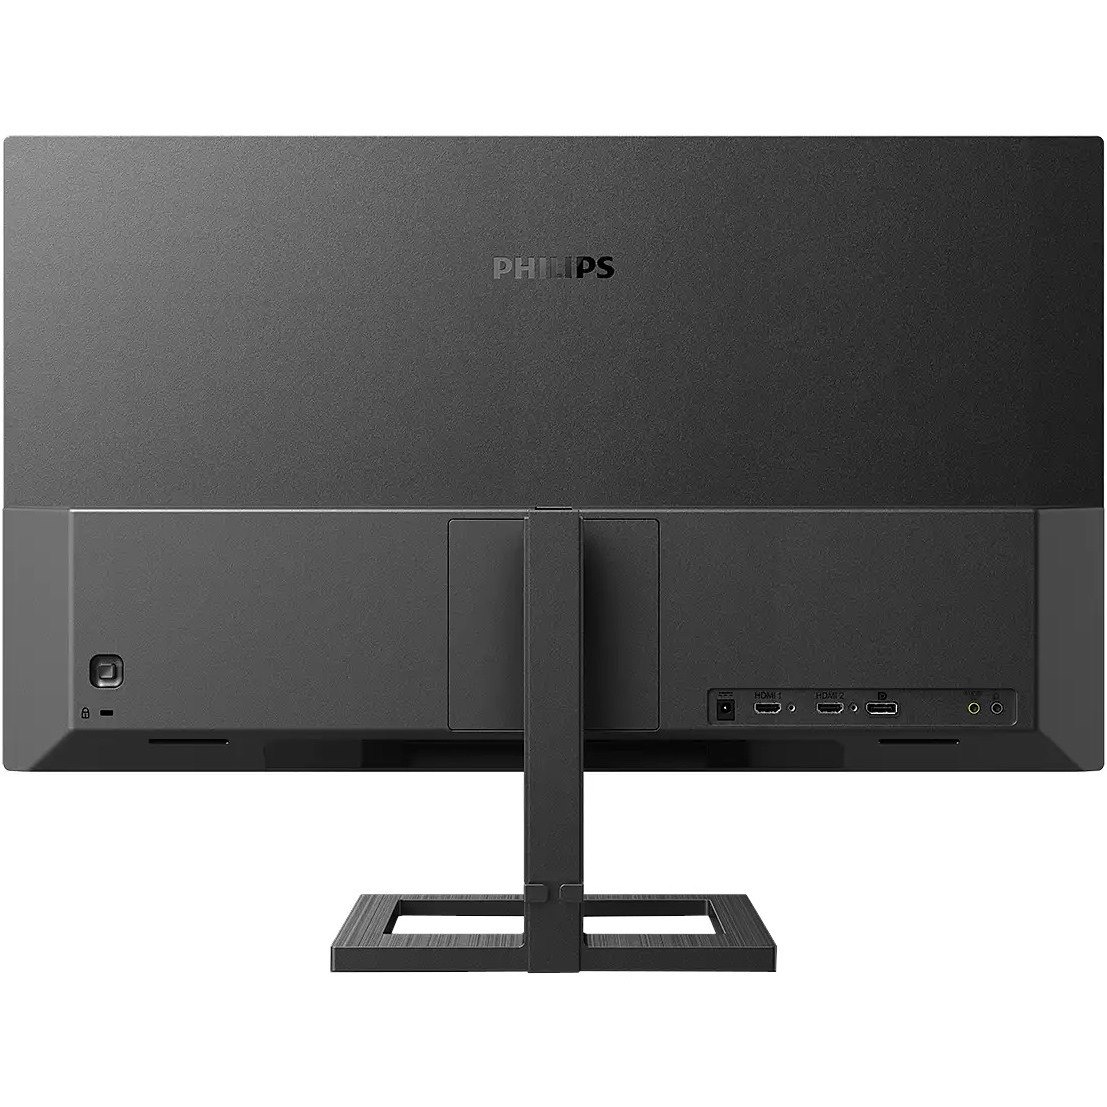 Philips 288E2A 71.1 cm (28") 4K UHD WLED Gaming LCD Monitor - 16:9 - Textured Black